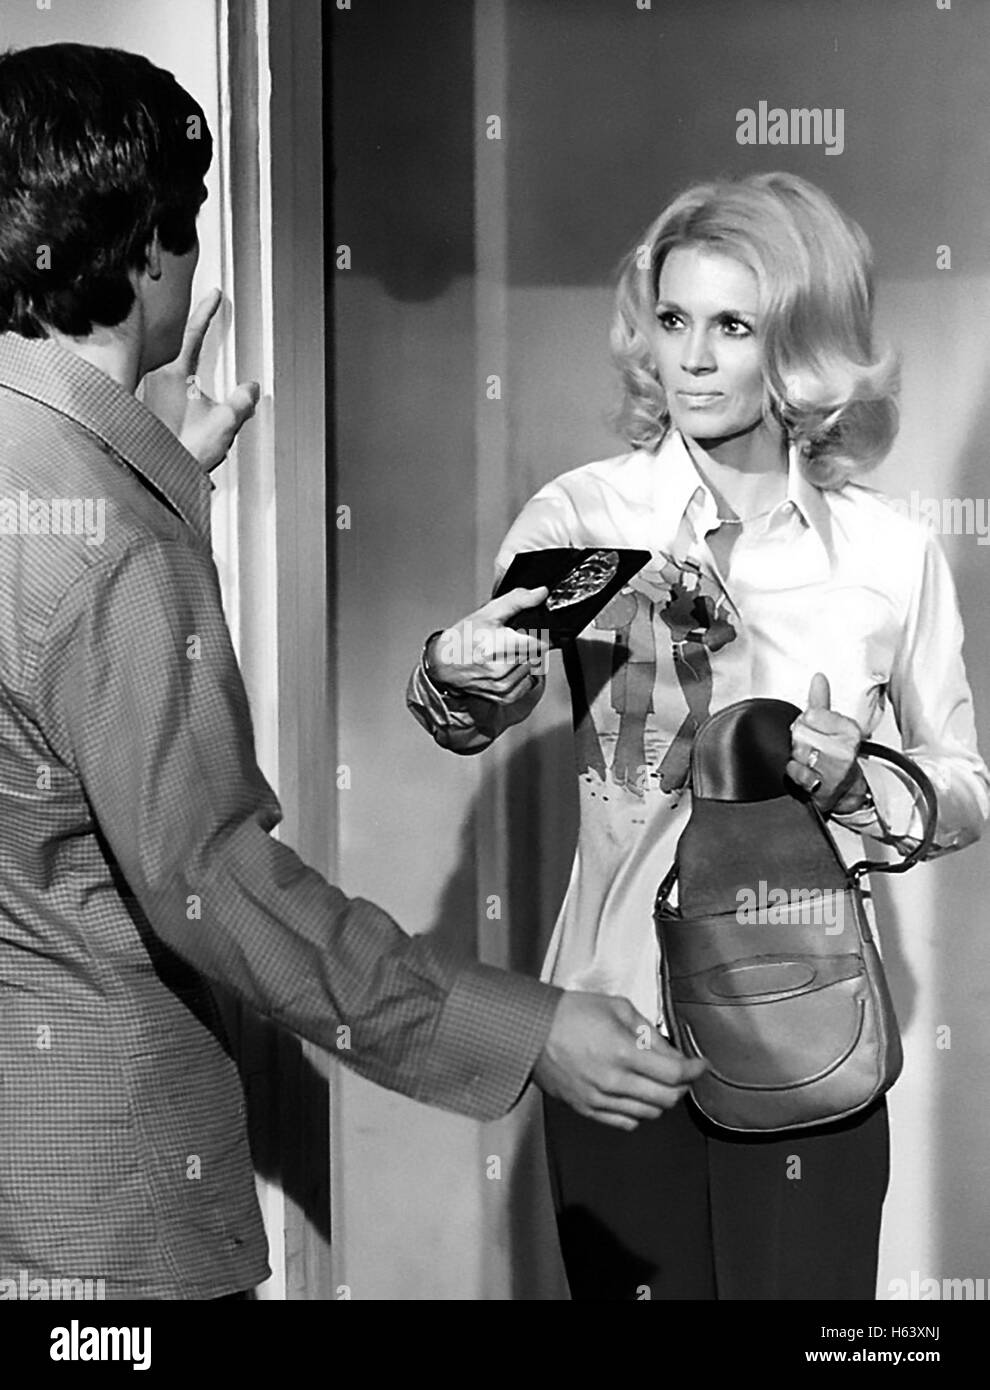 POLICE WOMAN Columbia Television series 1974-1978 with Angie Dickinson here in a 1976 episode Stock Photo